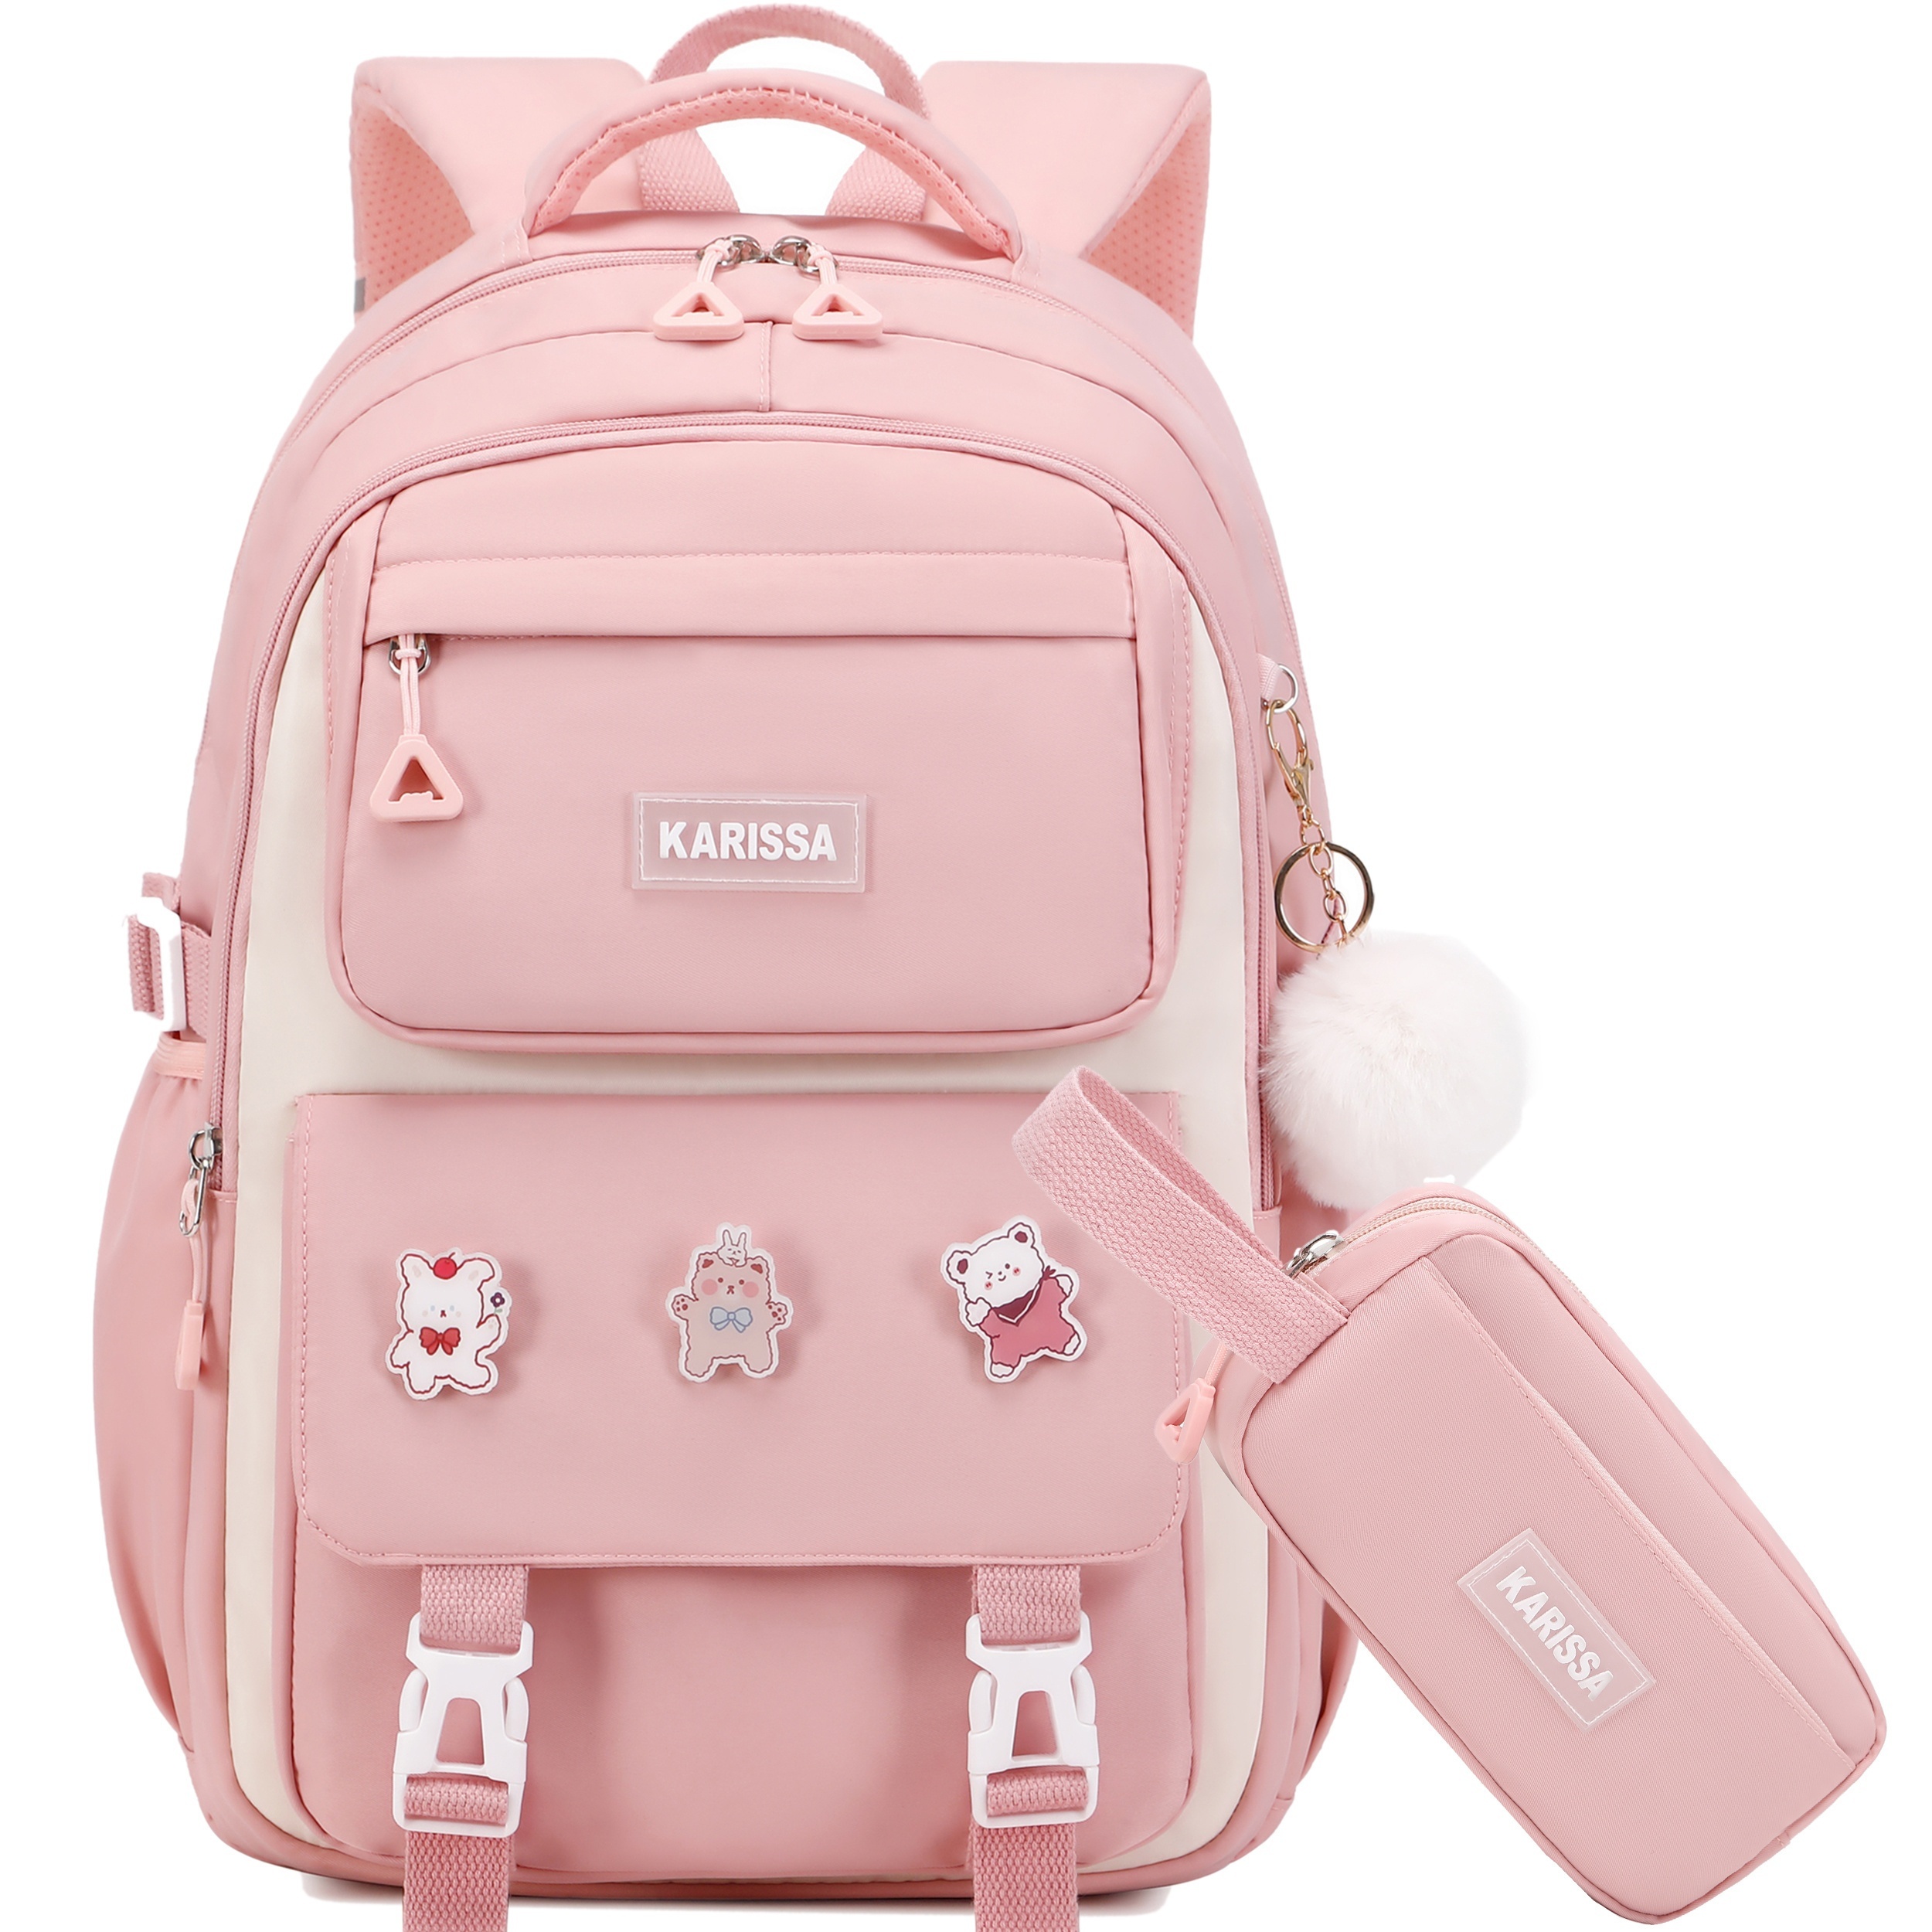 

Backpack For Girls Set With Pencil Case 15.6 Inch Laptop School Bag Cute Kids Elementary College Backpacks Large Bookbags For Women Teens Students Anti Theft Travel Daypack - Pink